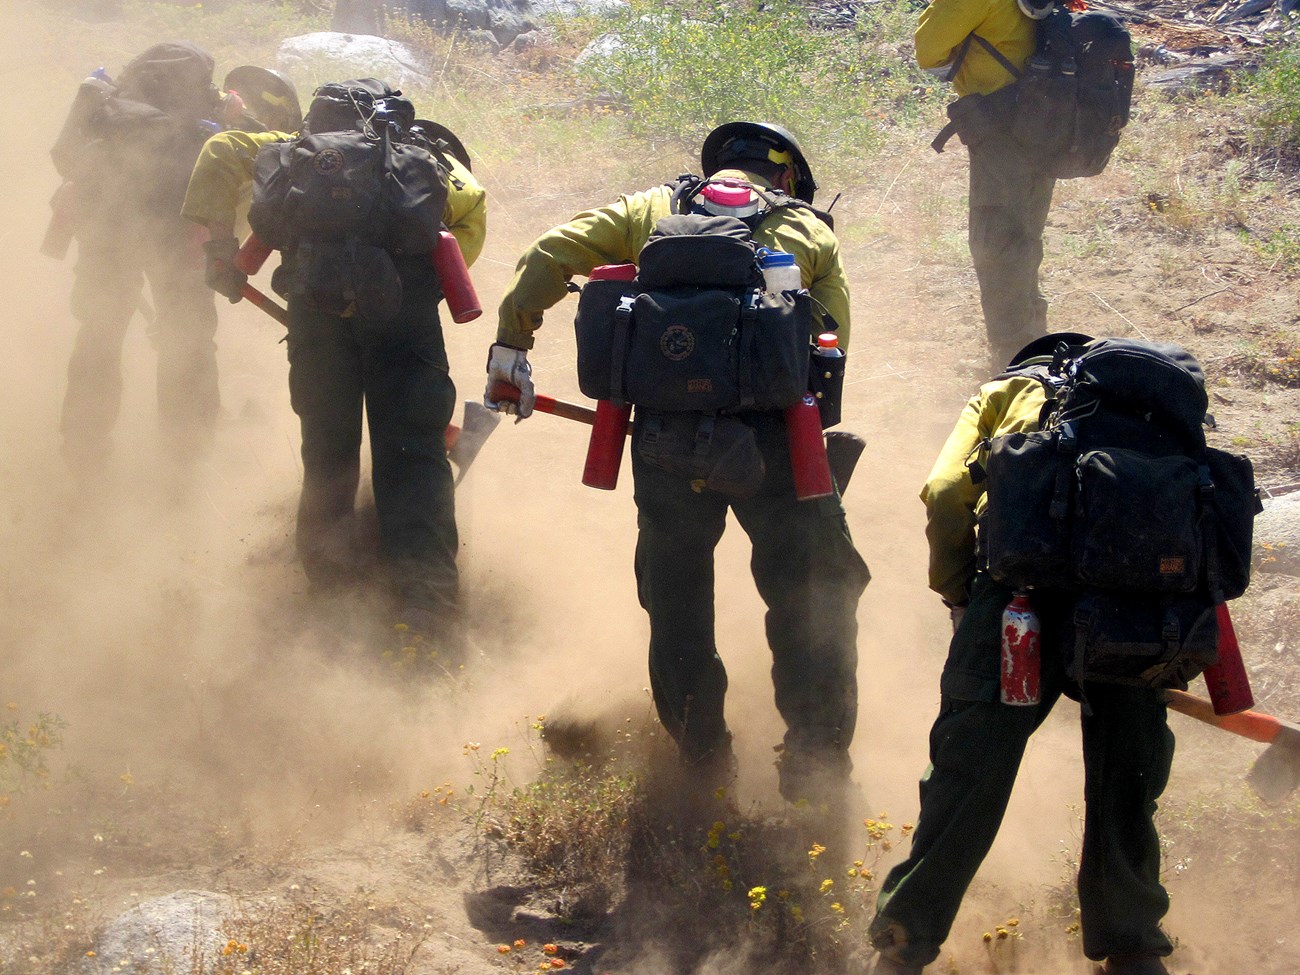 firefighters in full gear digging a line in a dusty environment.